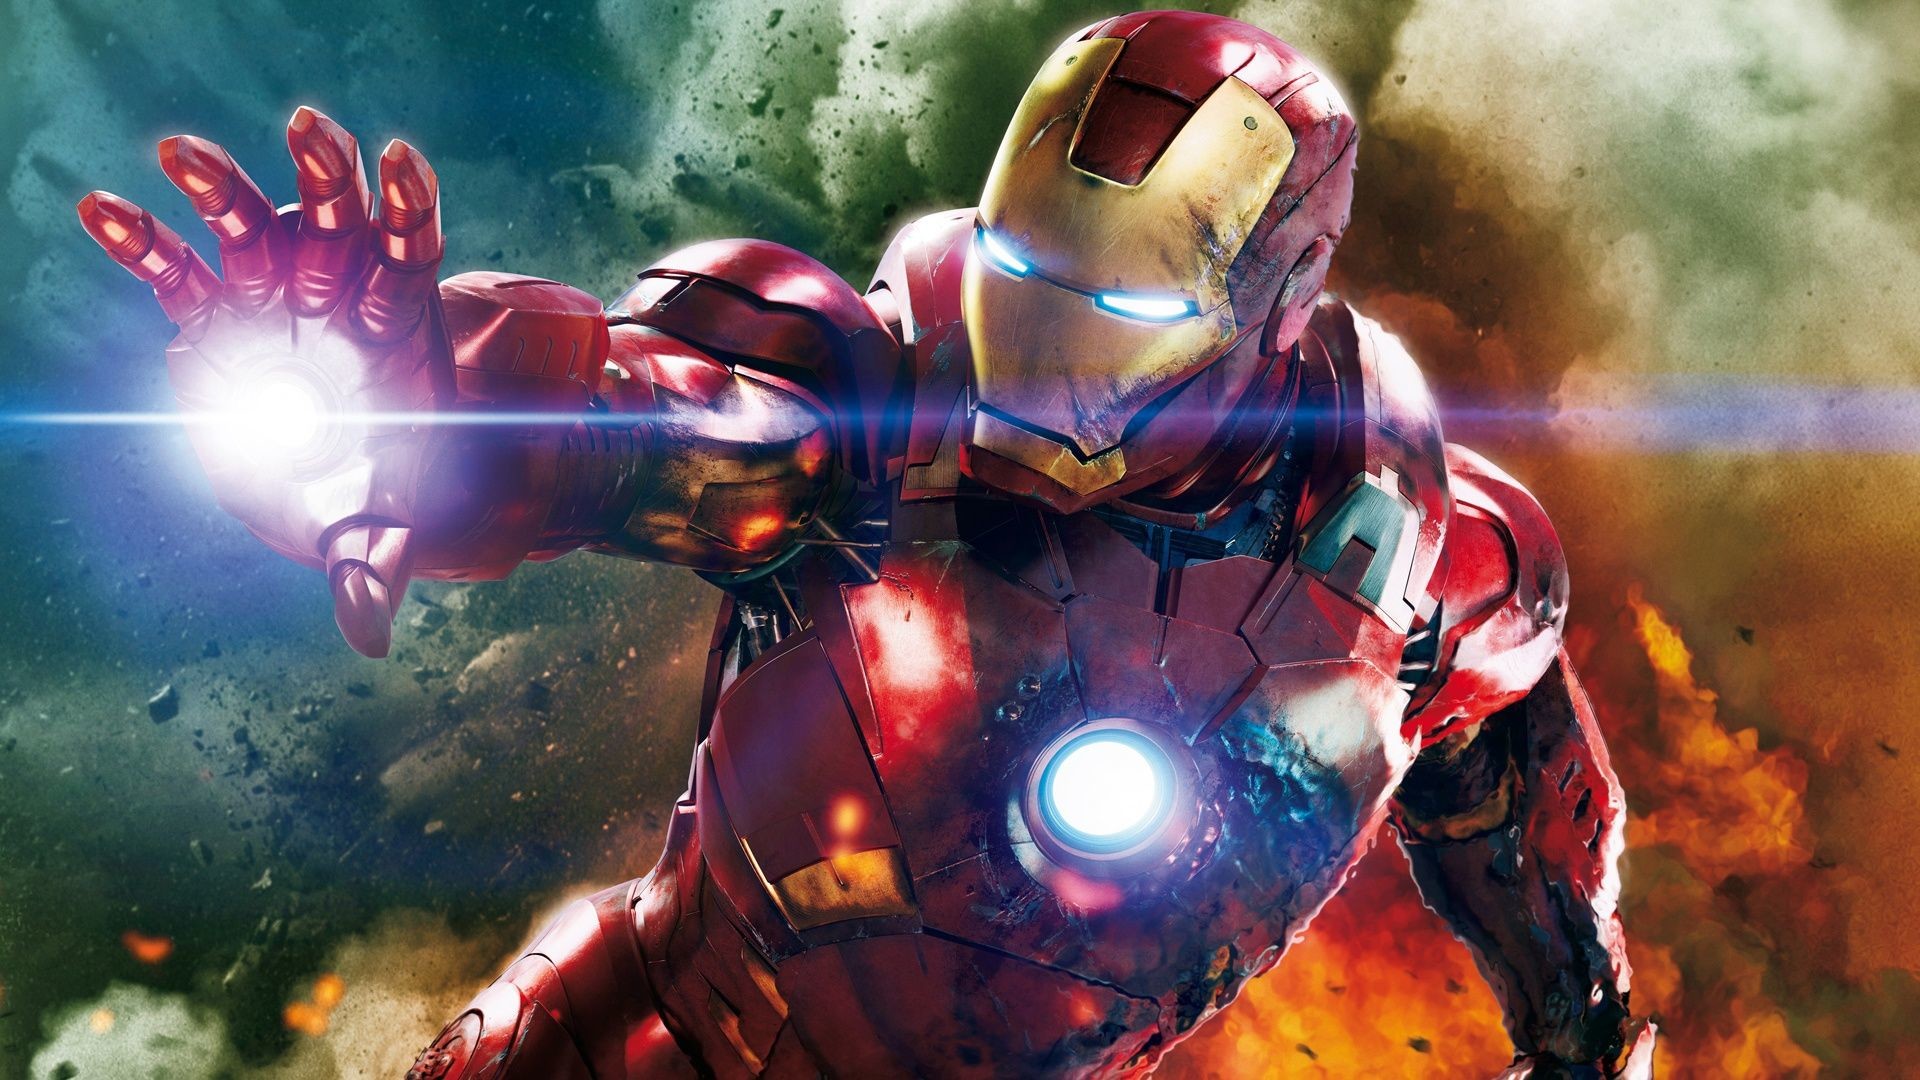 1920x1080 Iron Man HD Wallpaper for PC – Full HD Pictures for PC & Mac, Tablet,  Laptop, Mobile